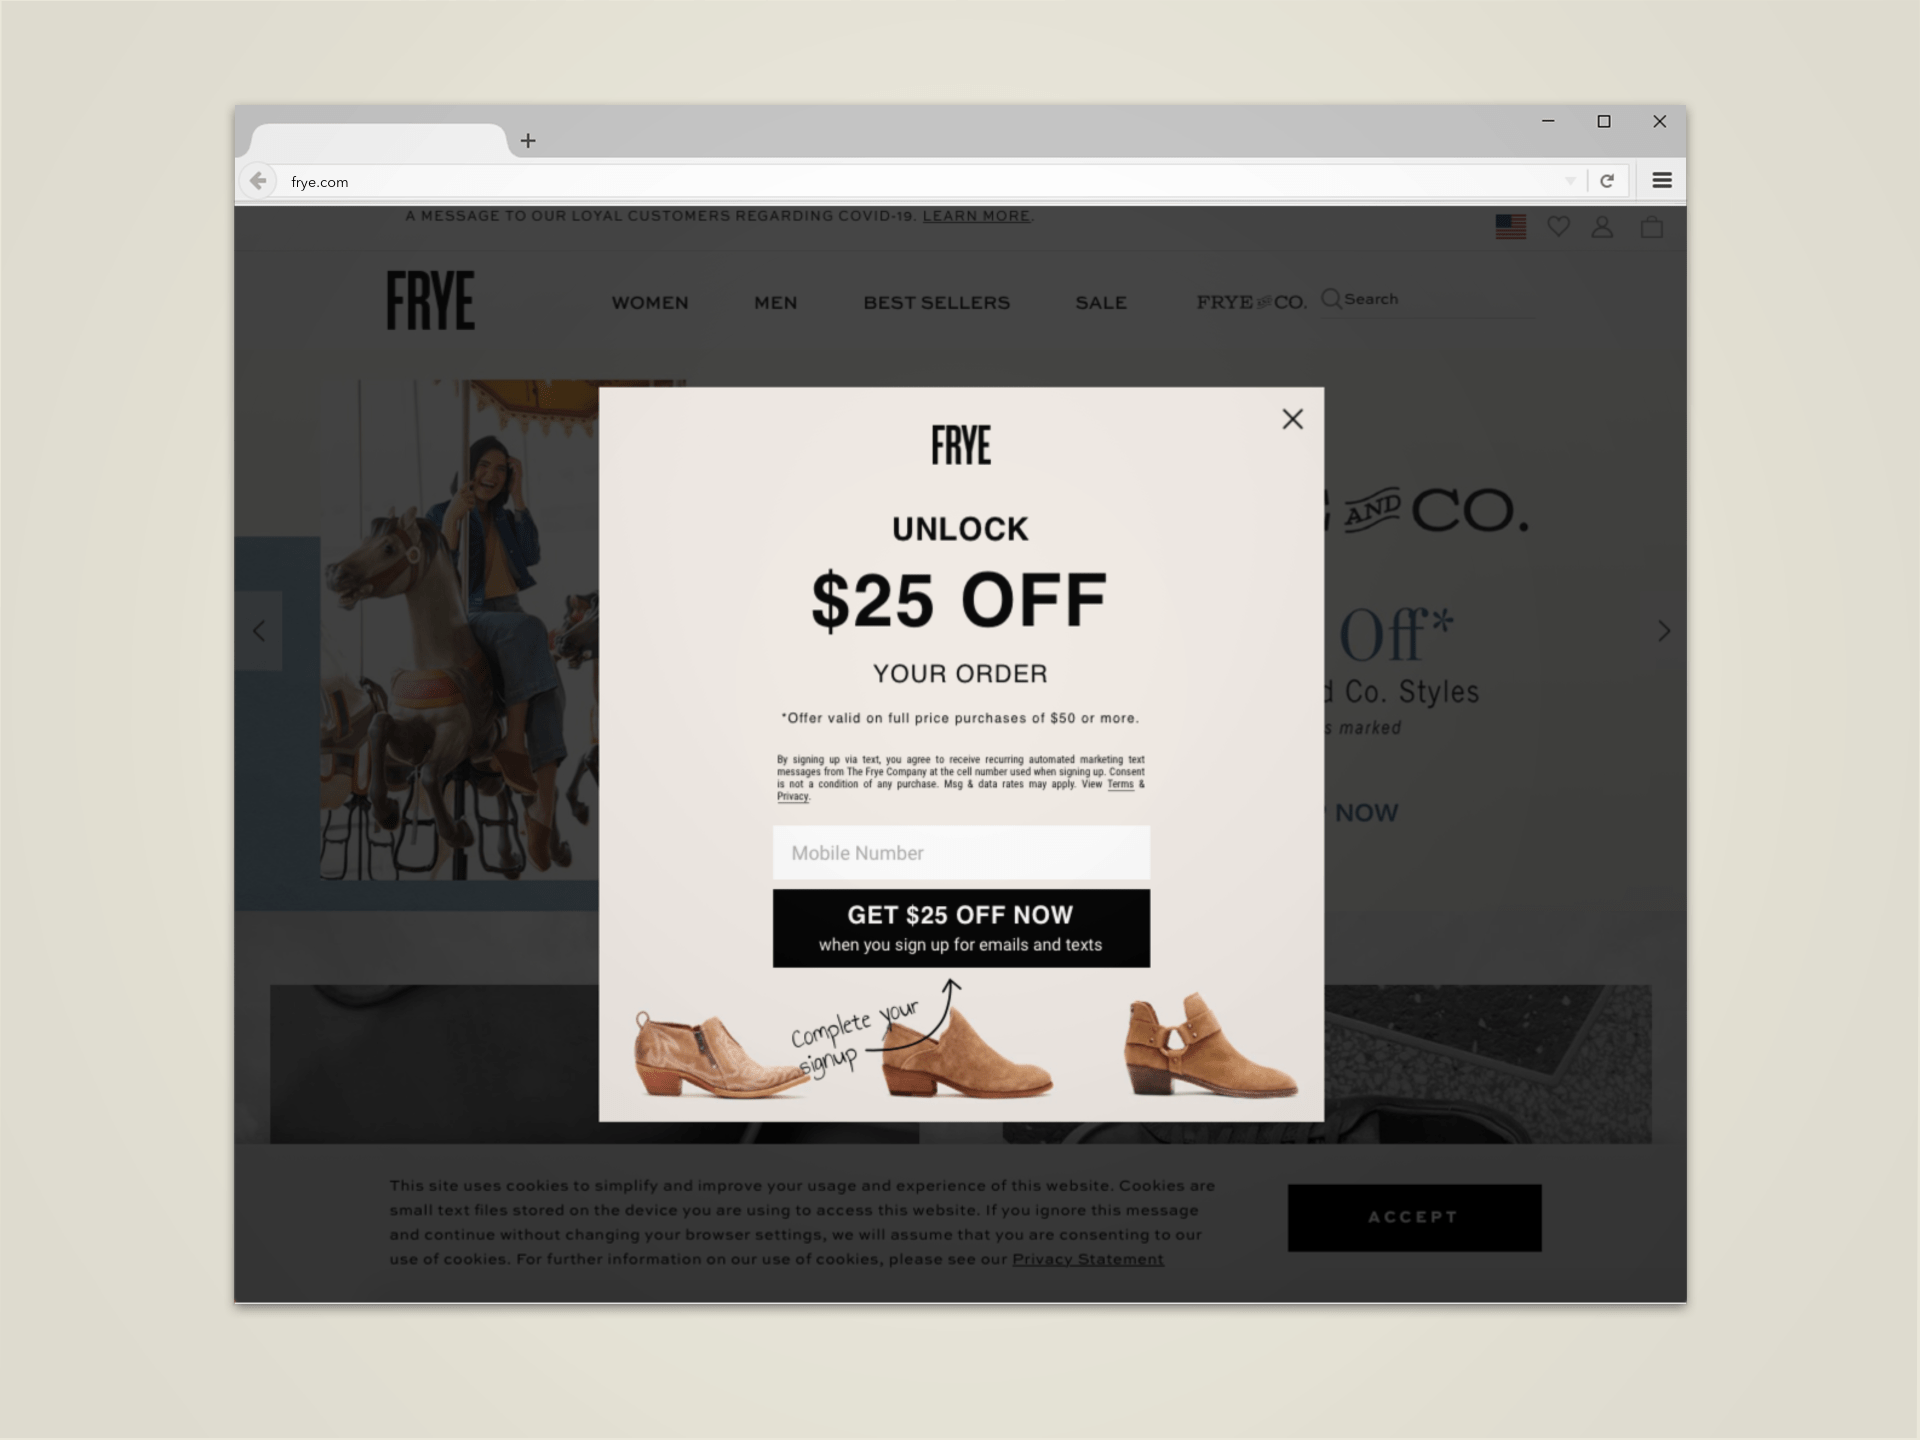 sms marketing pop-up example from frye